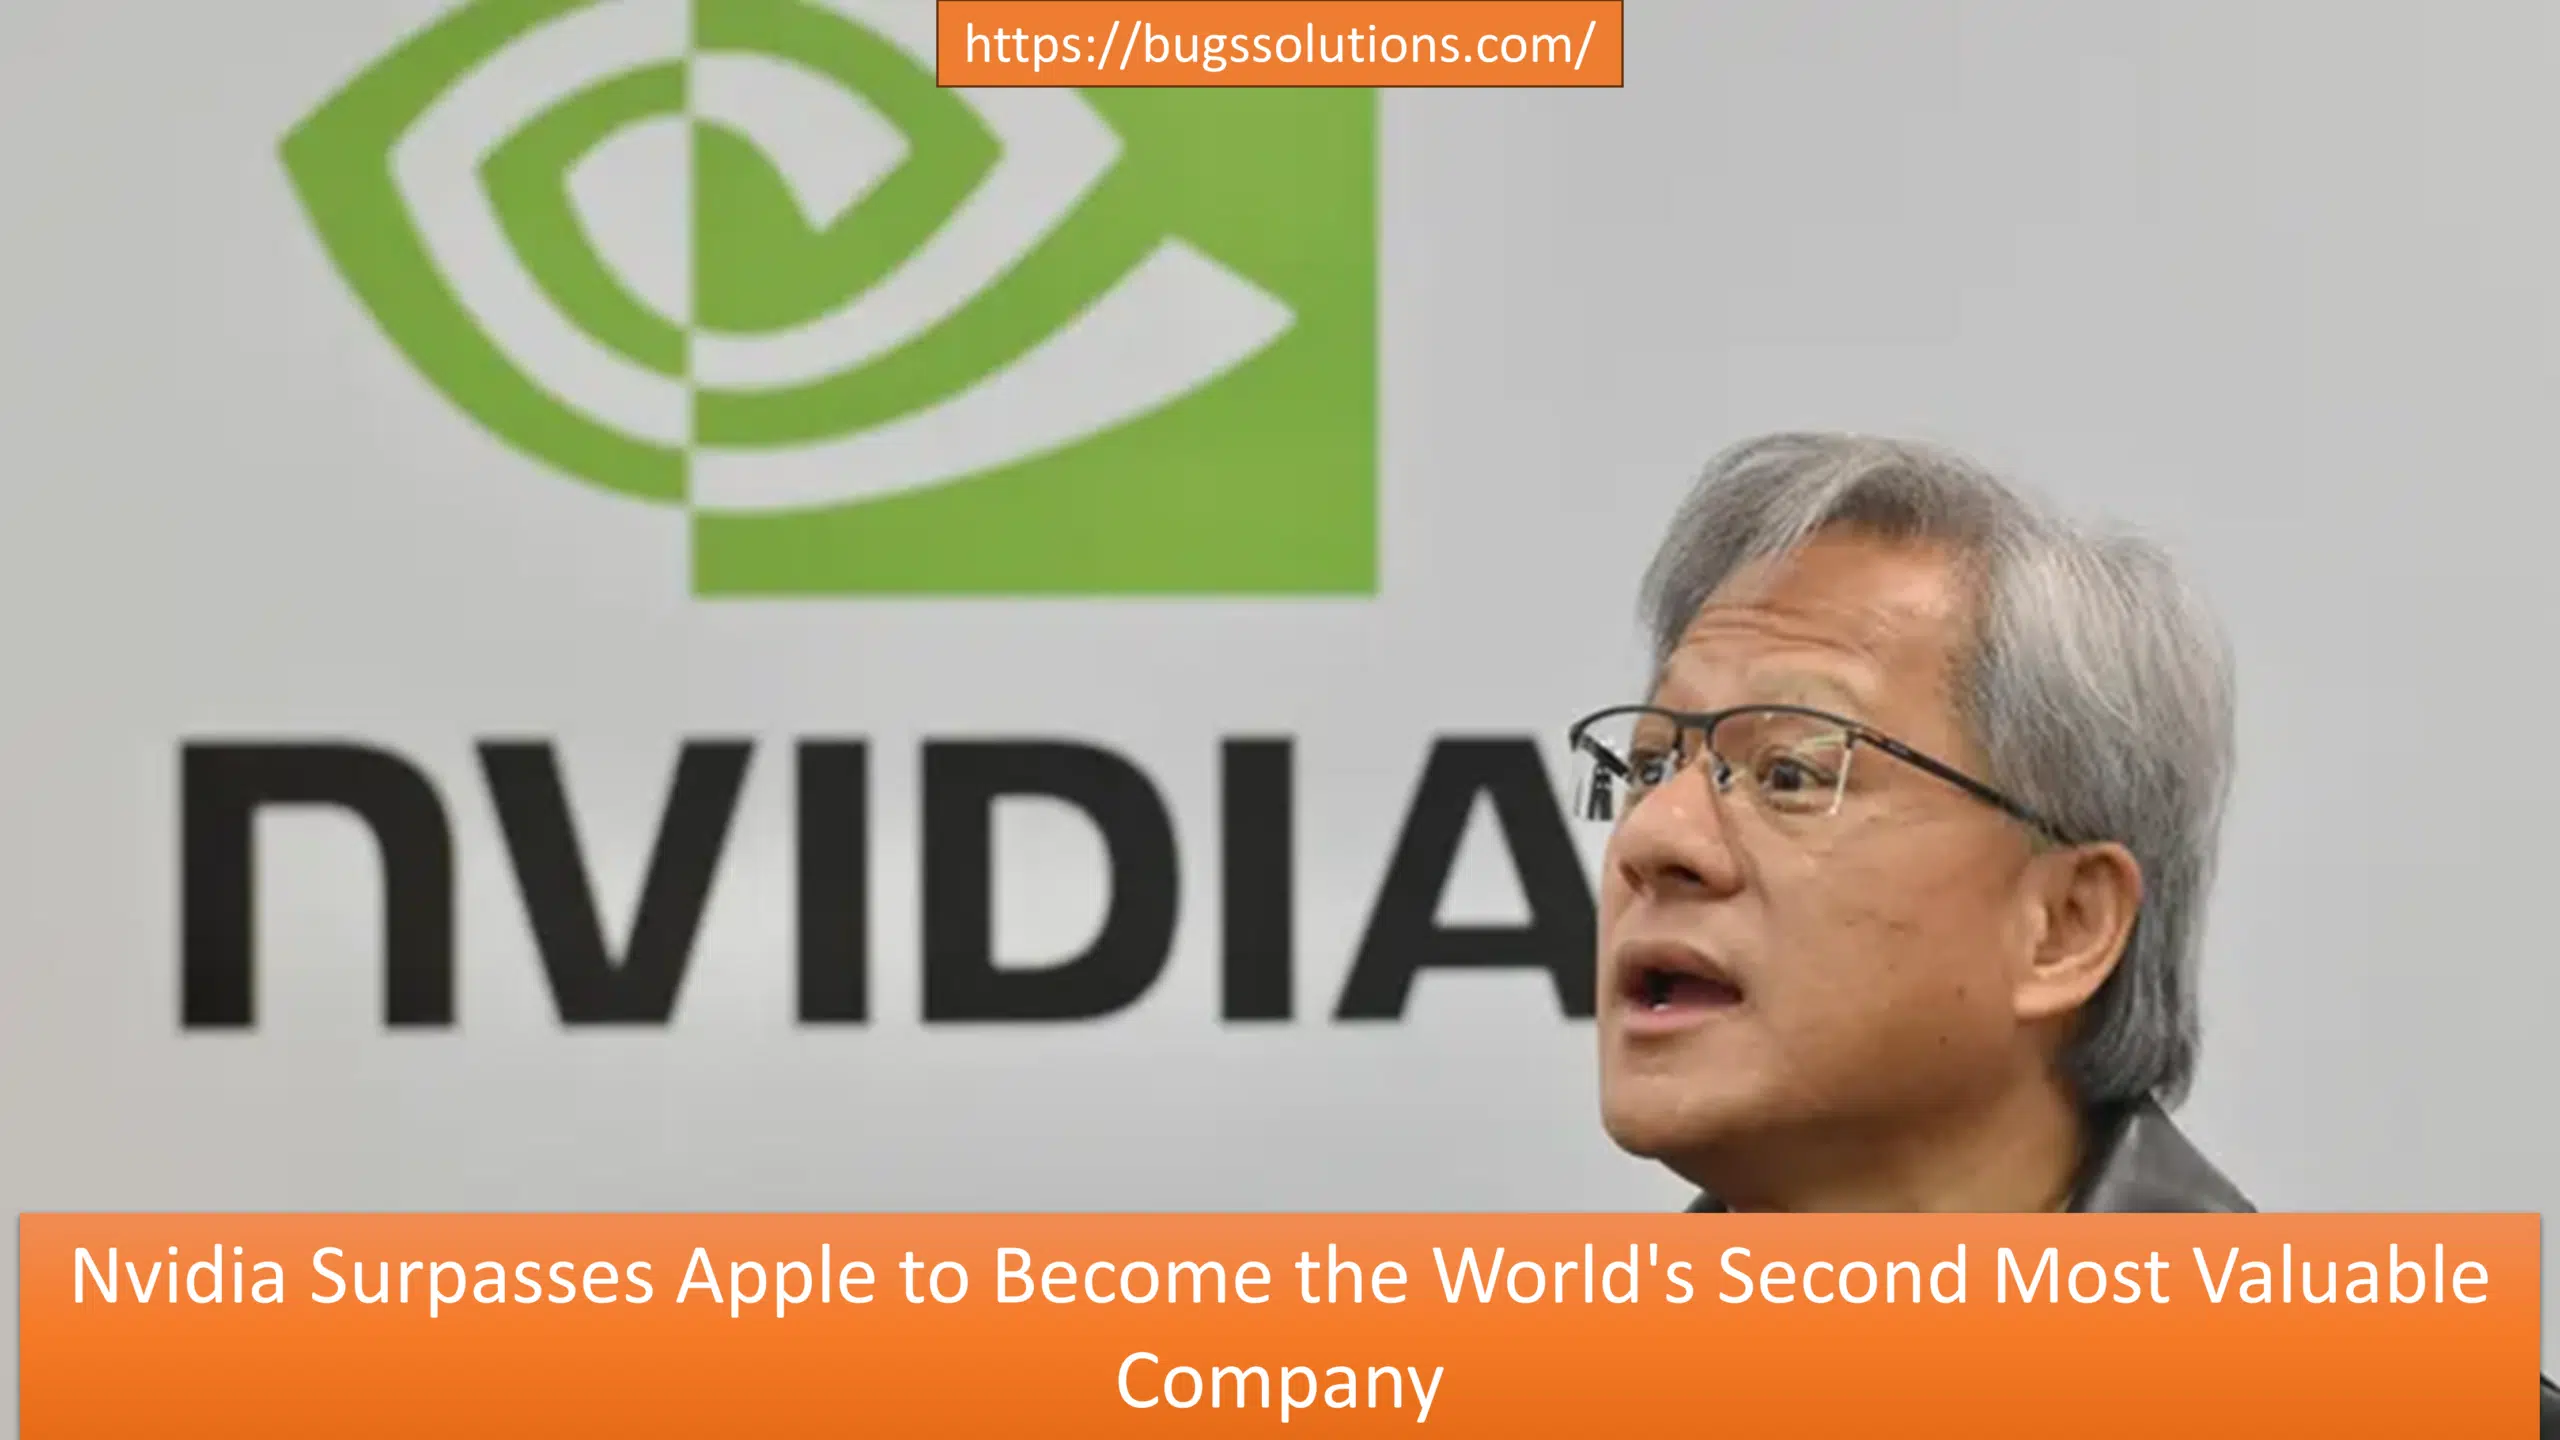 Nvidia Surpasses Apple to Become the World's Second Most Valuable Company